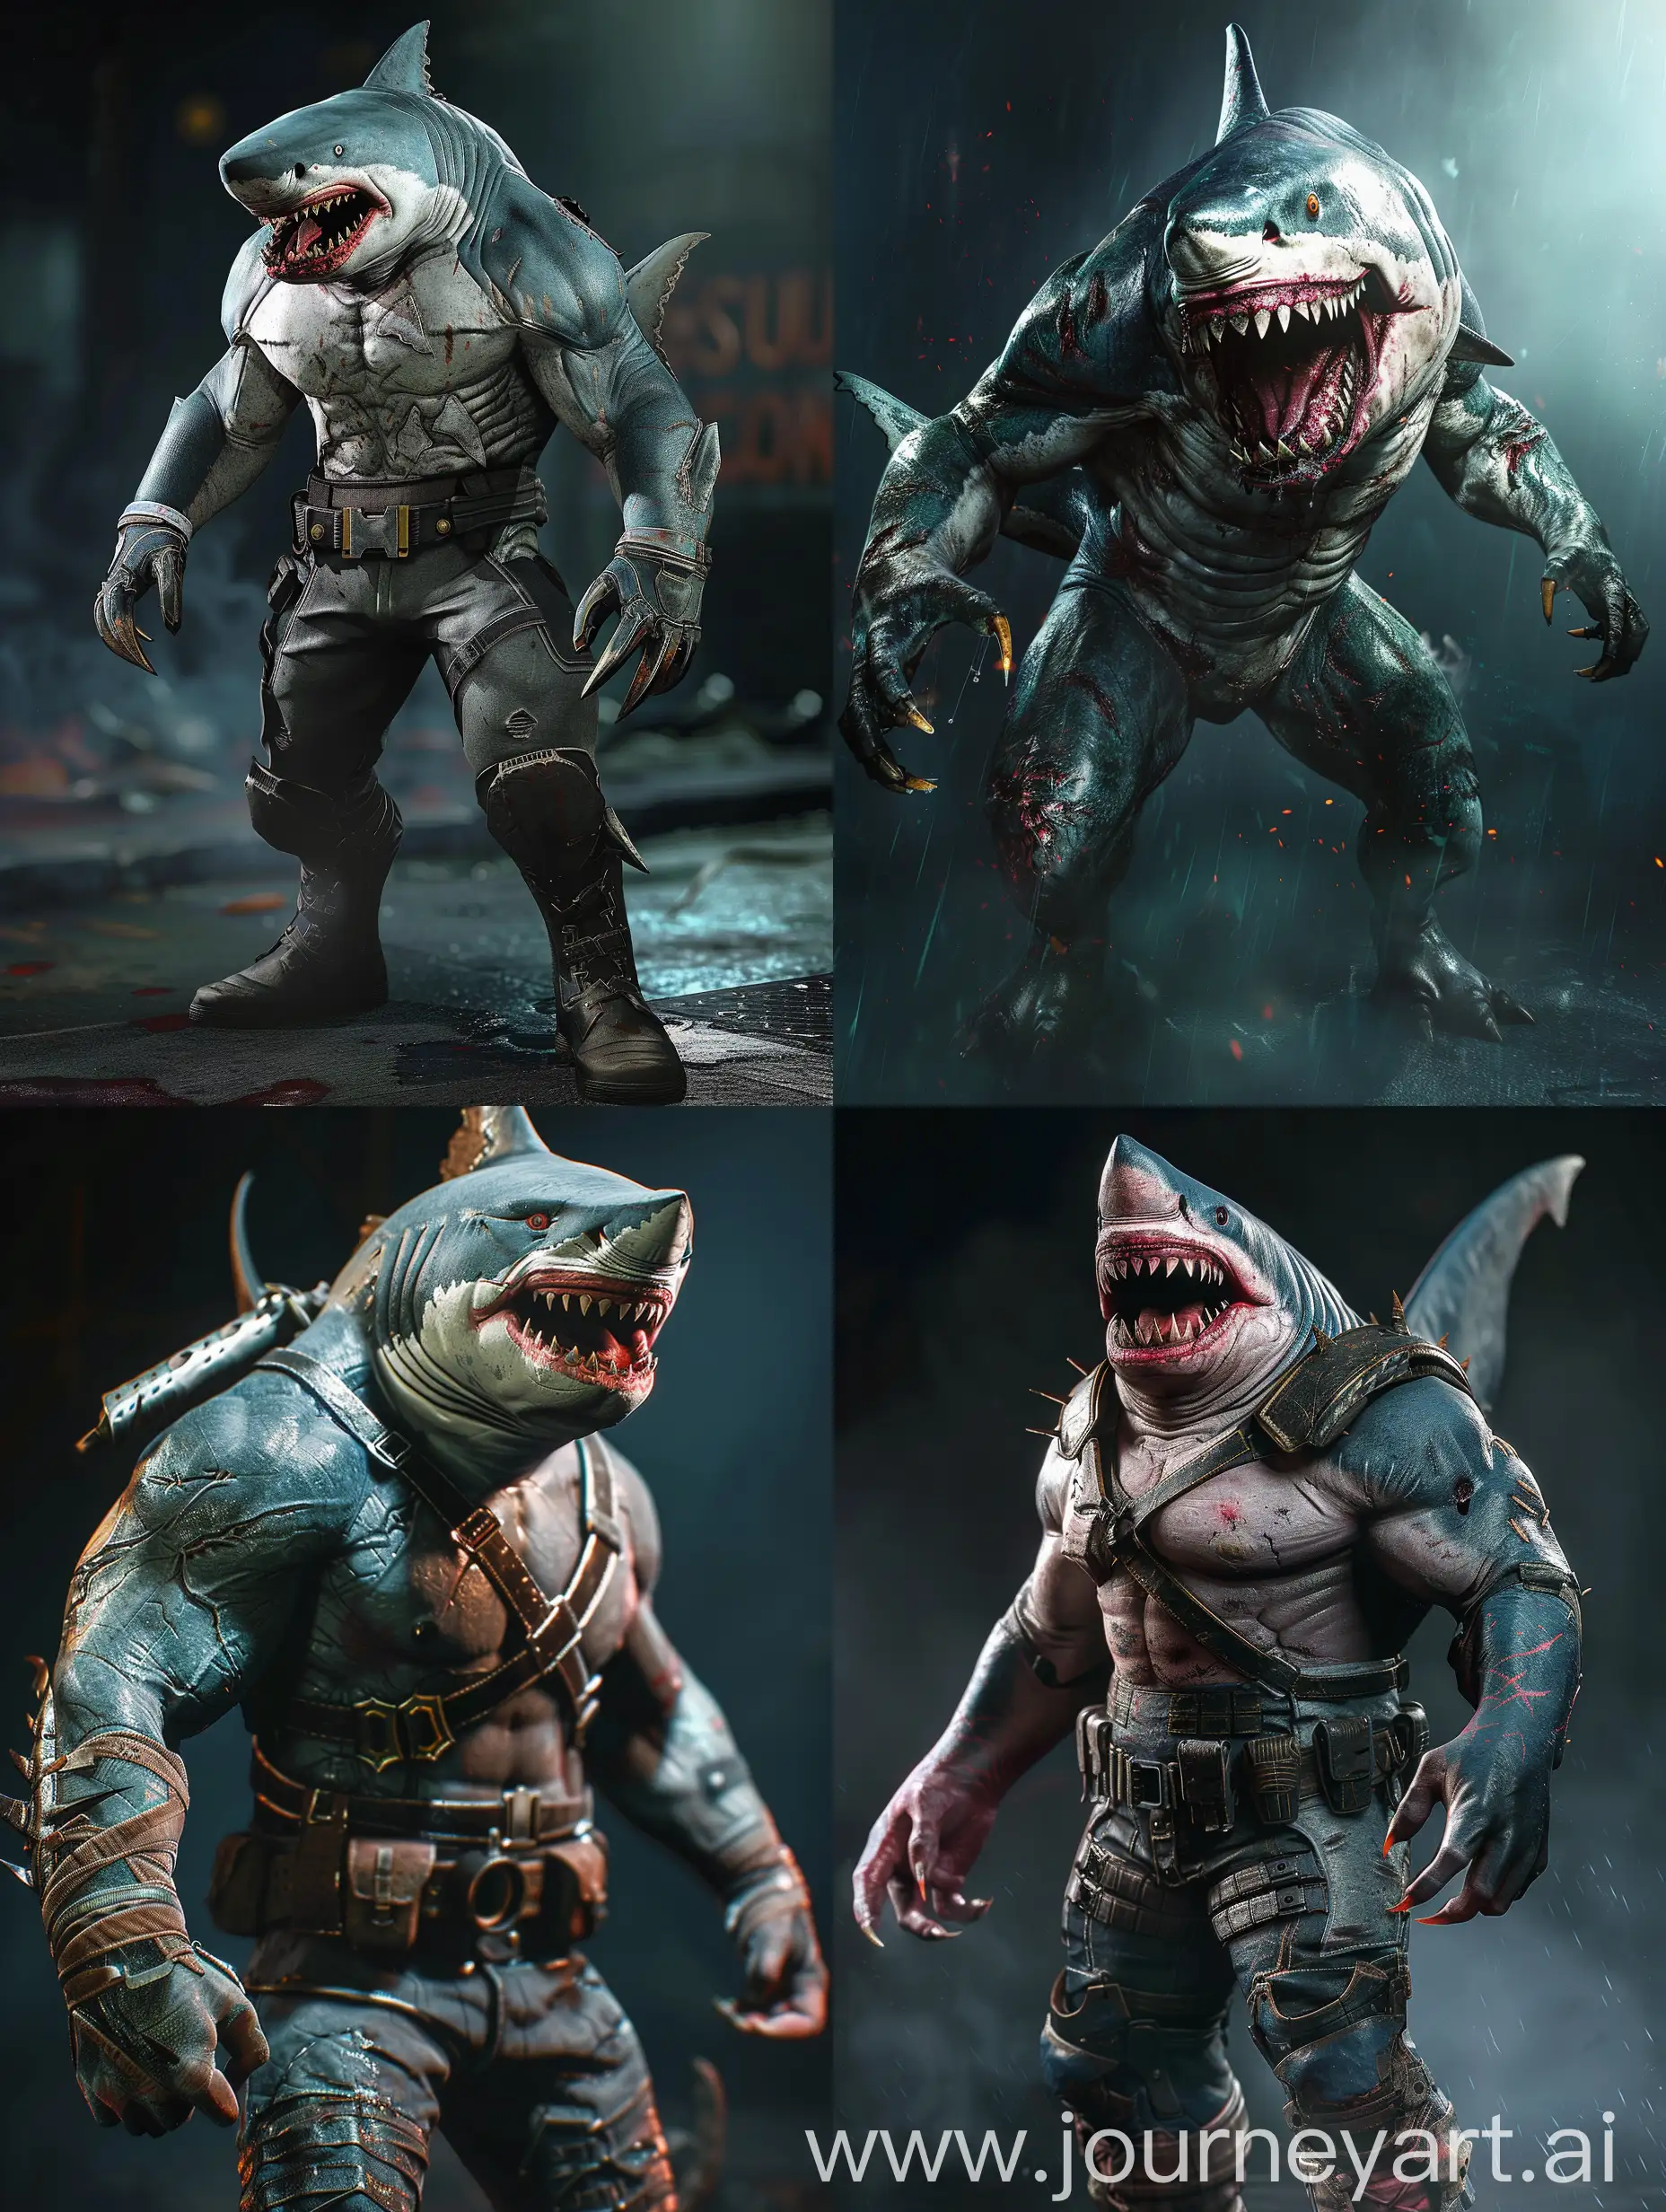 King-Shark-from-Suicide-Squad-Video-Game-Majestic-Aquatic-Predator